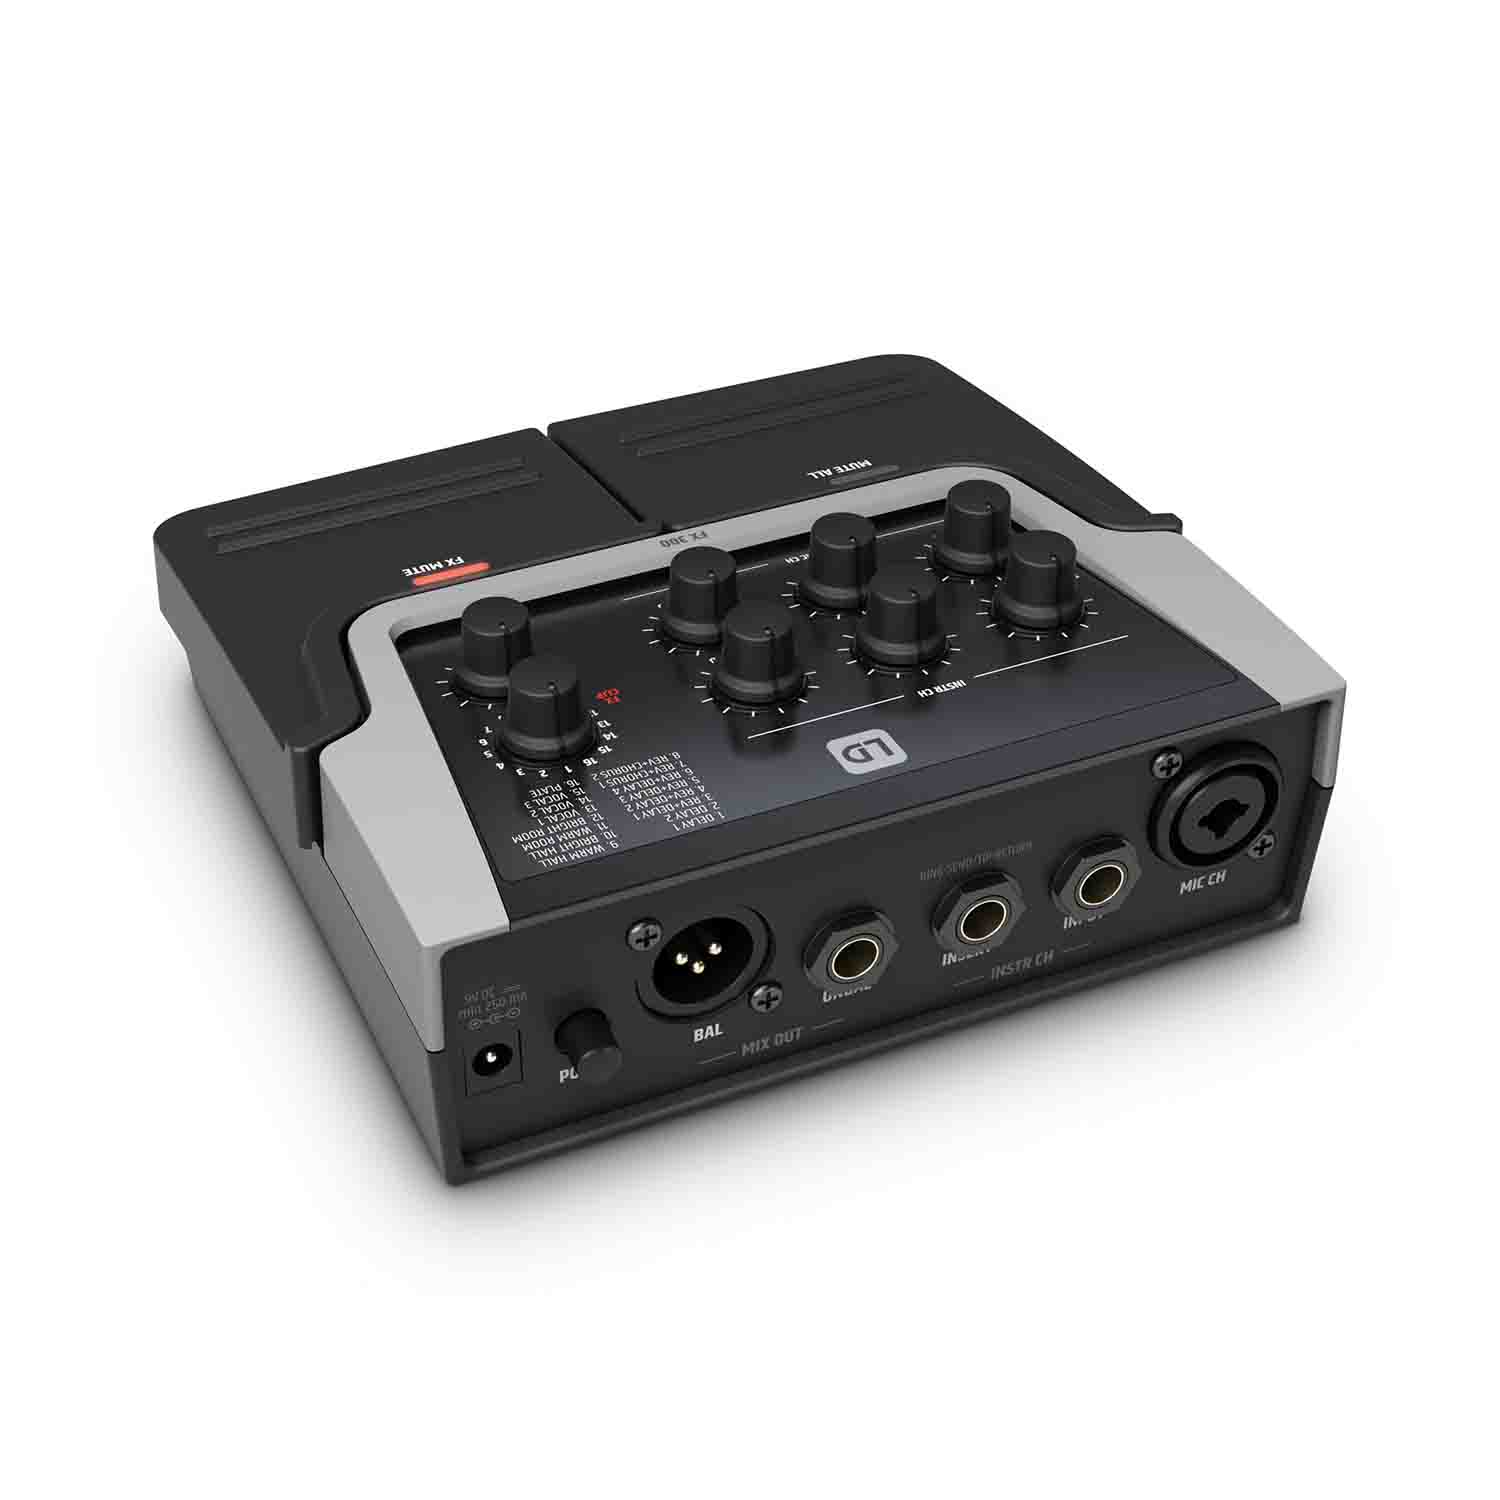 LD Systems FX 300 2-Channel Pedal with 16 Digital Effects - Hollywood DJ